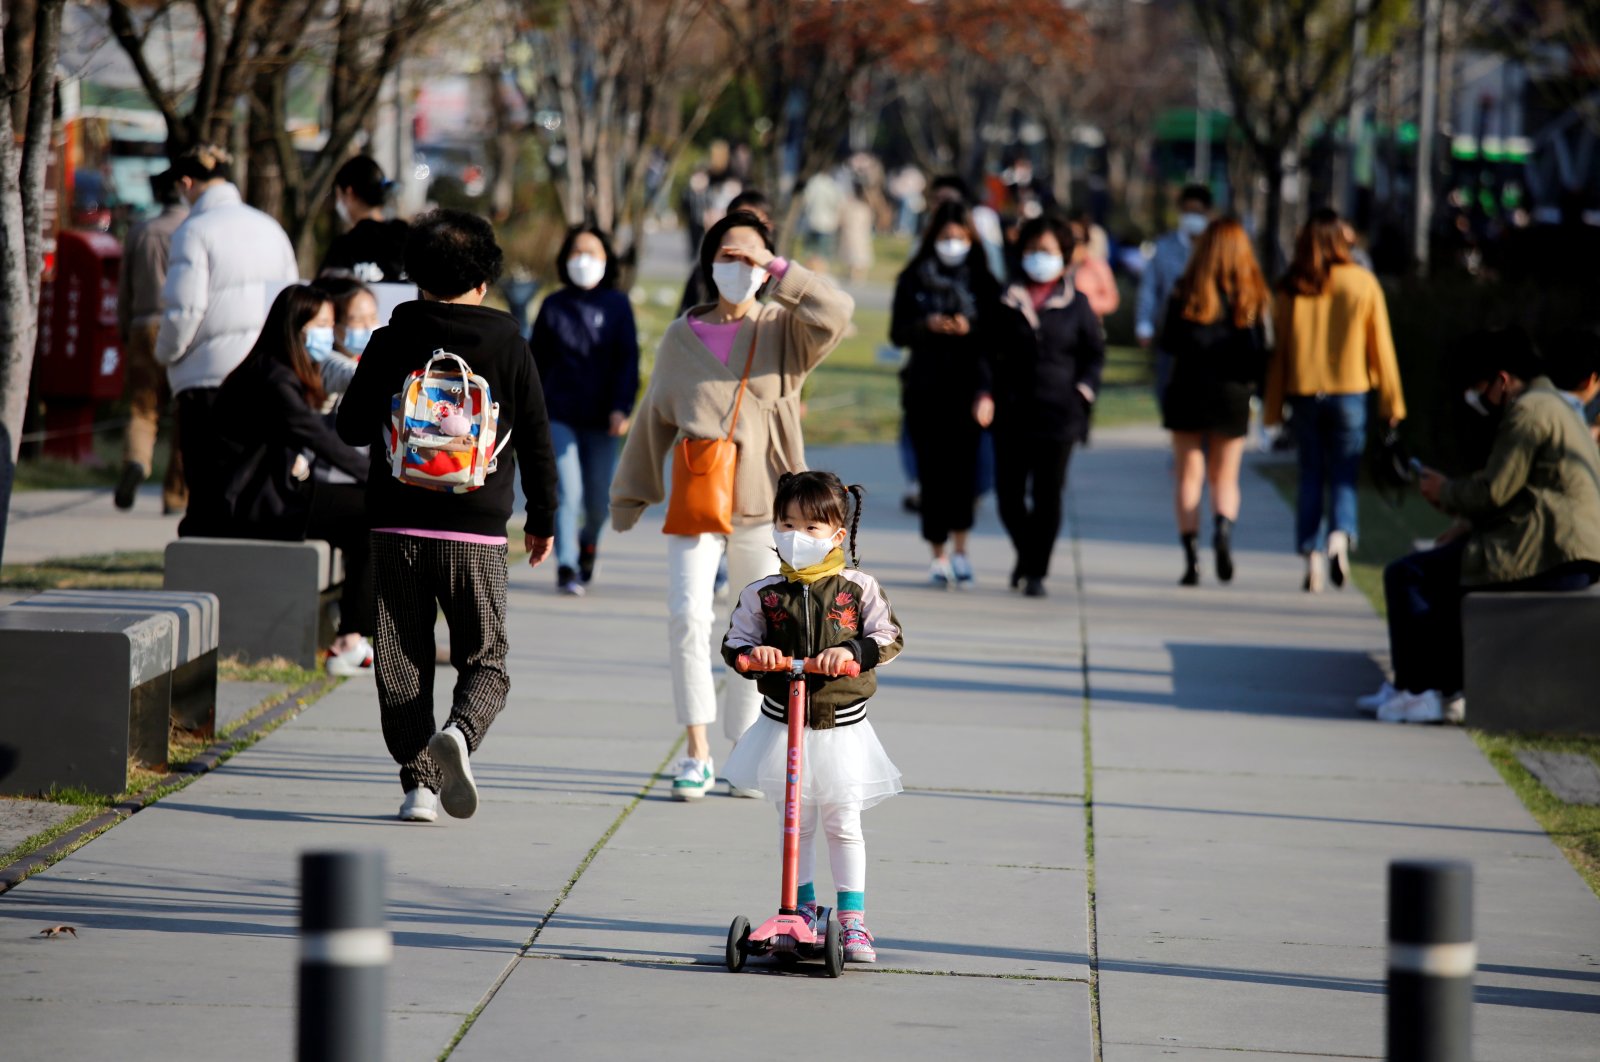 A girl wearing a protective face mask to prevent contracting the coronavirus rides a toy kick scooter at a park in Seoul, South Korea, April 3, 2020. (Reuters Photo)